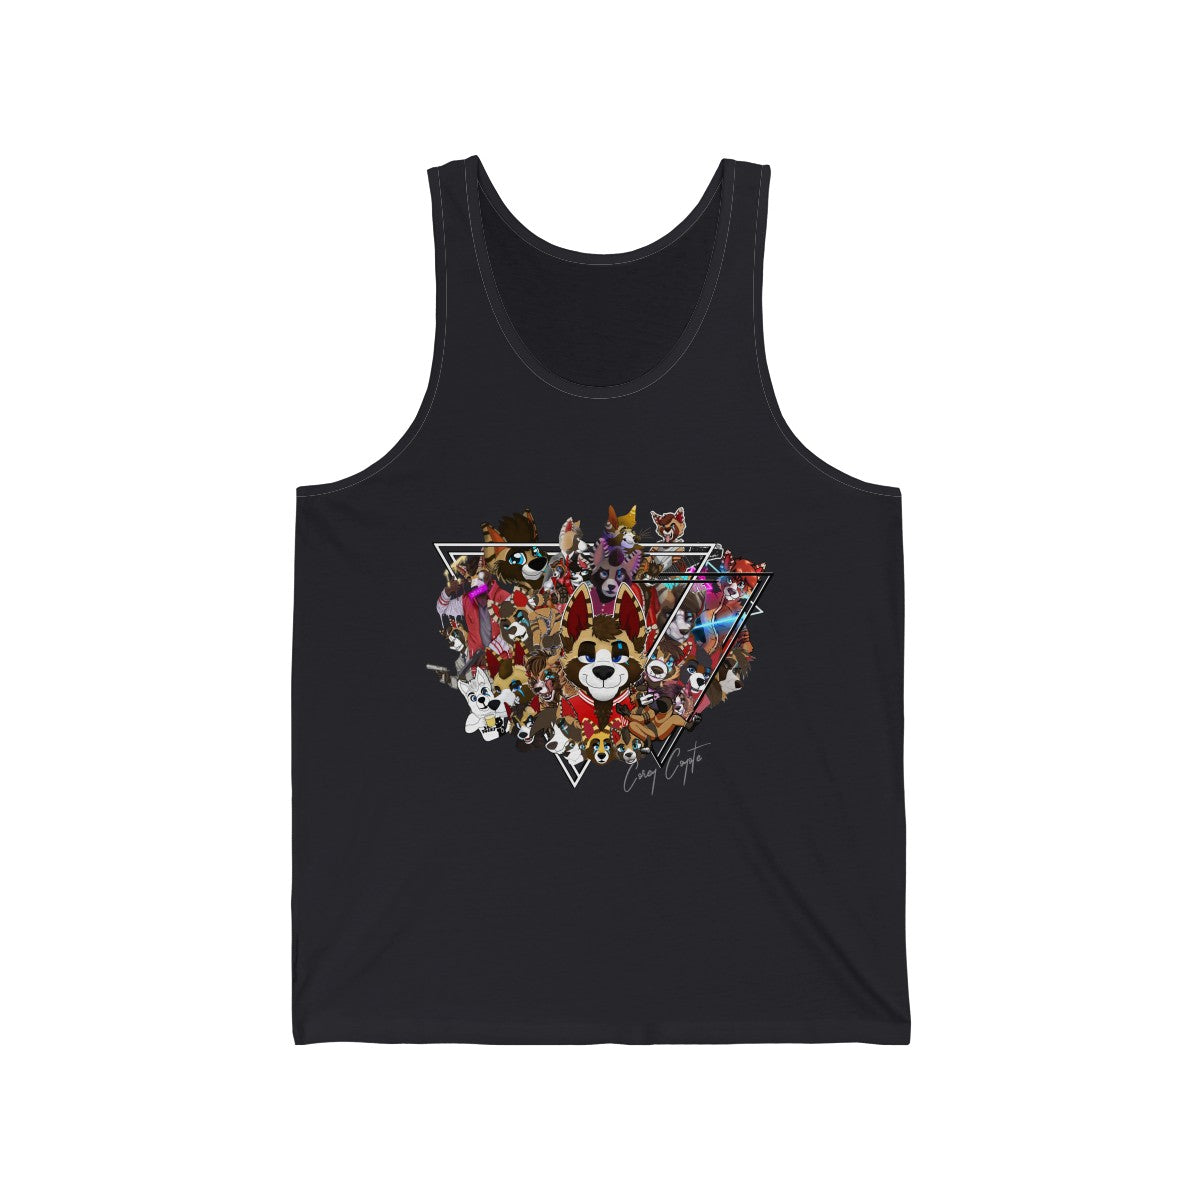 For The Fans - Tank Top Tank Top Corey Coyote Dark Grey XS 